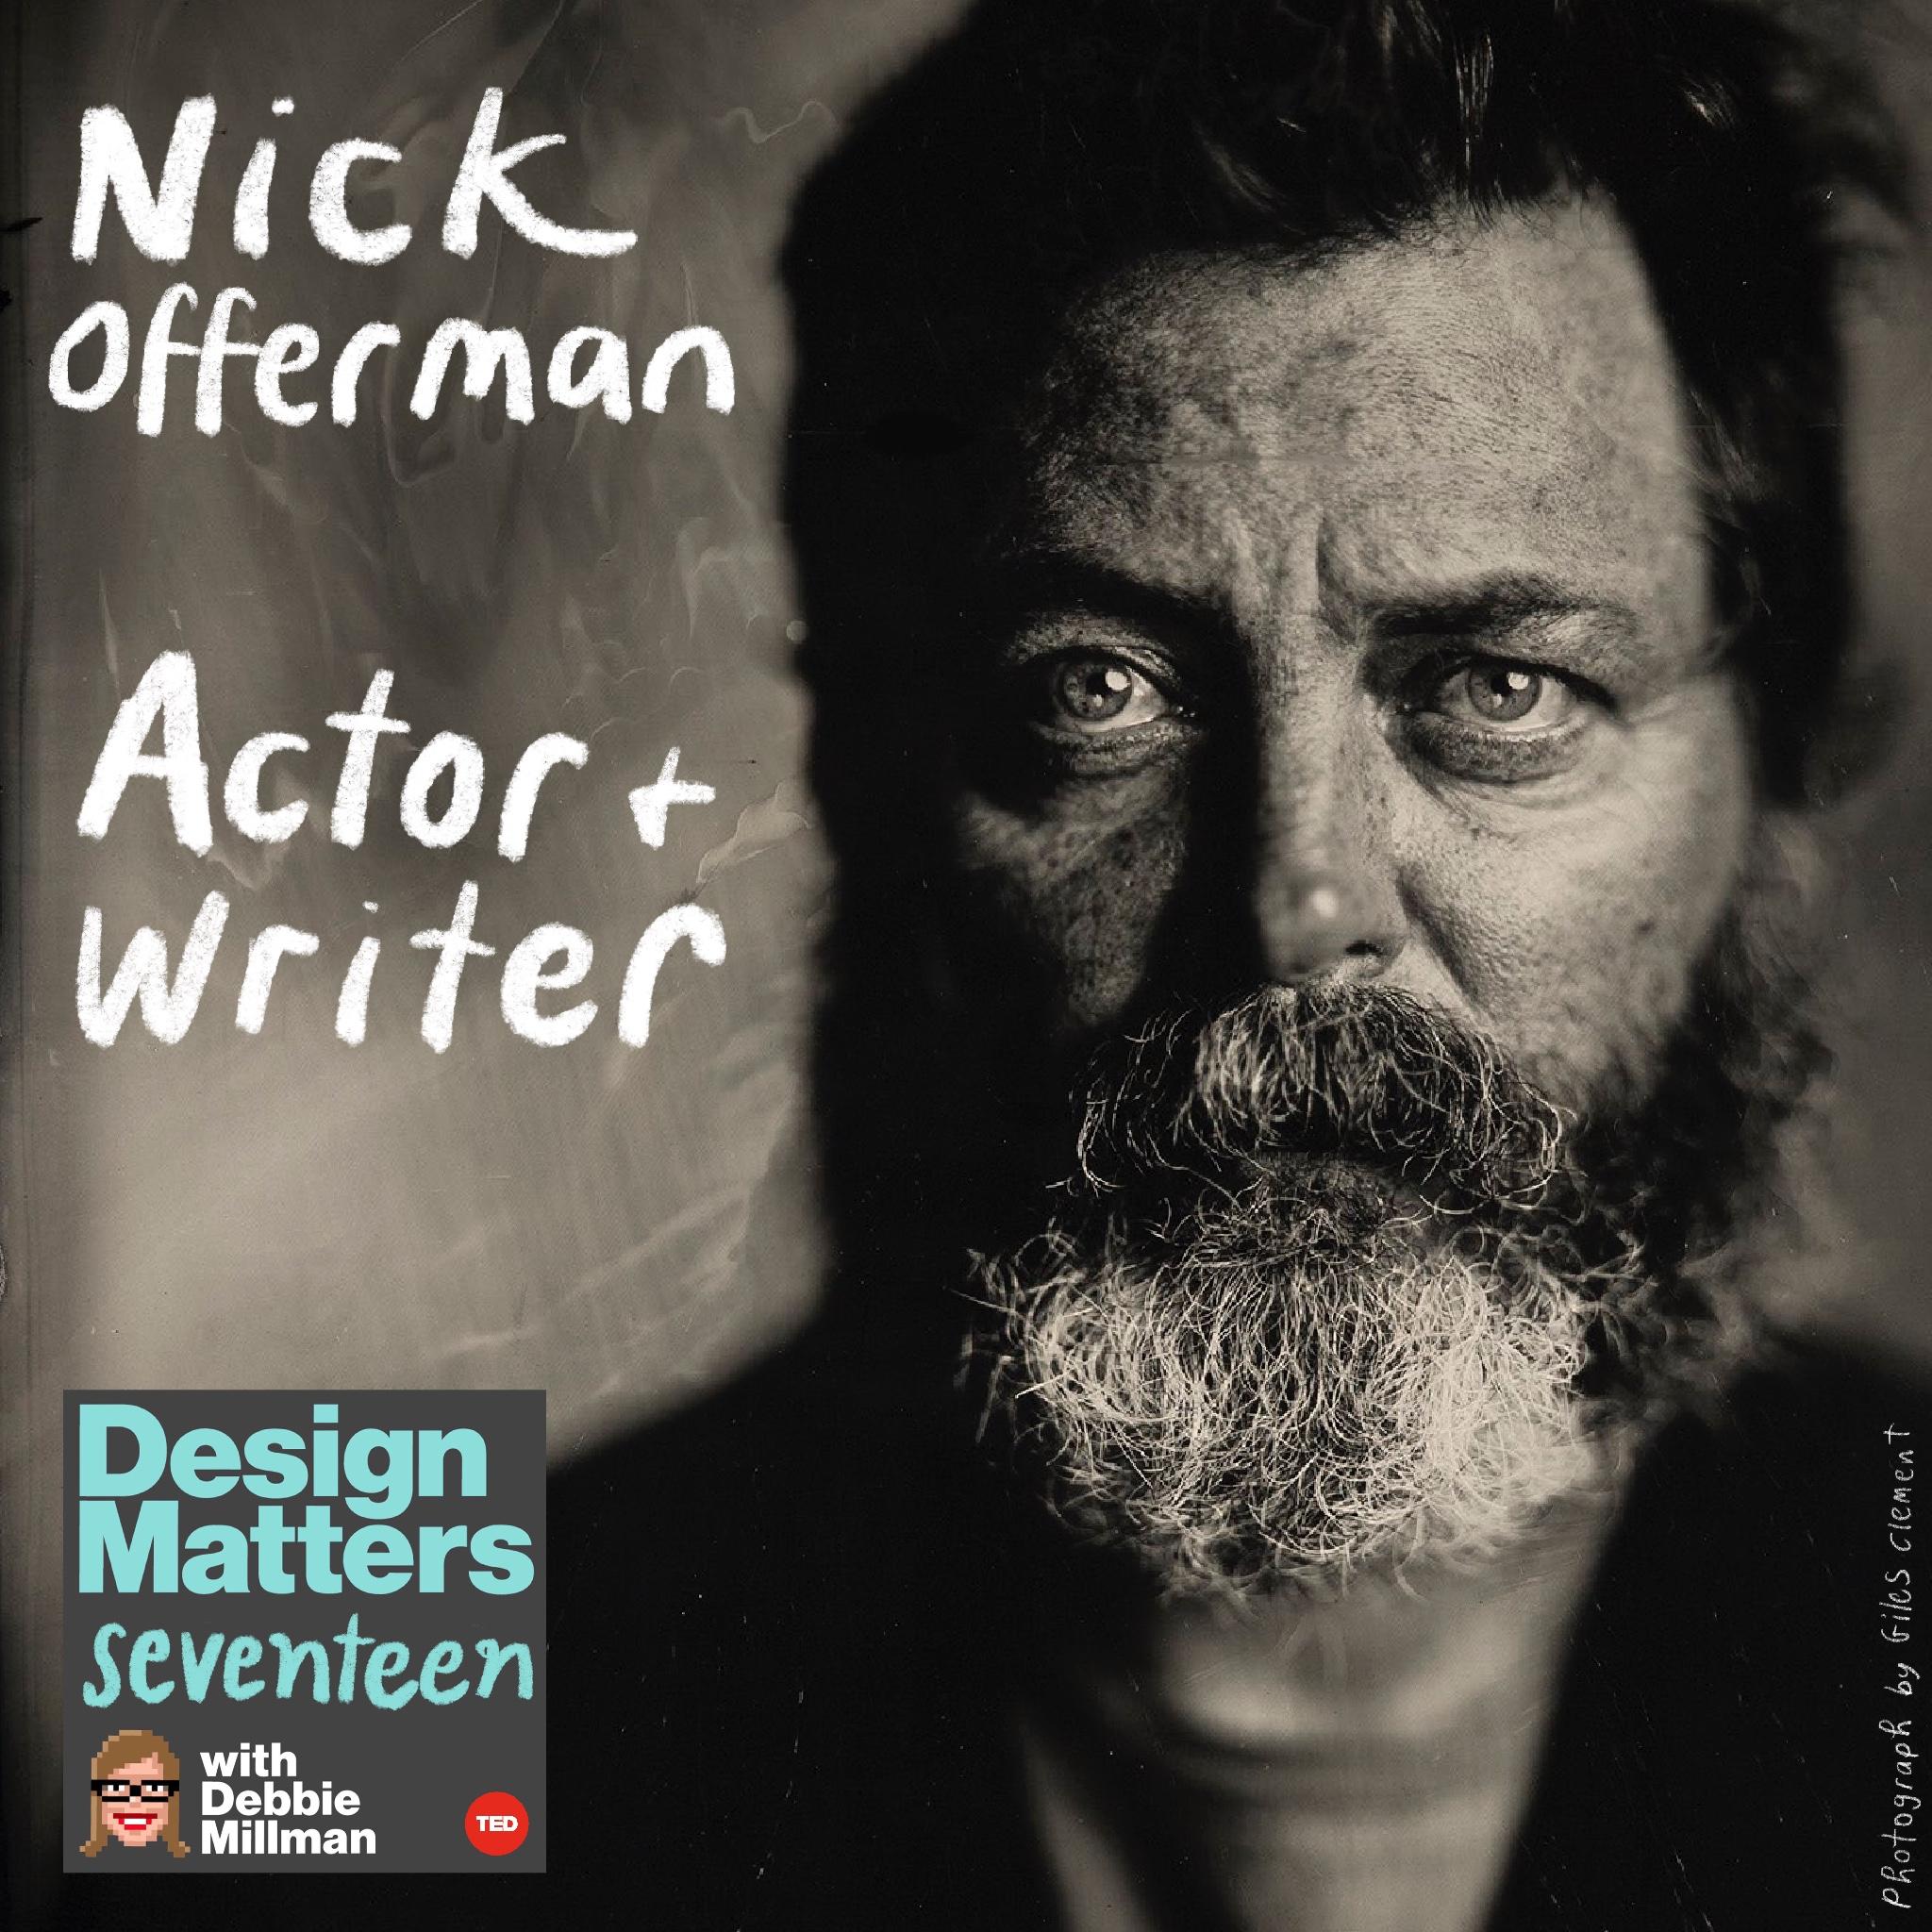 Thumbnail for "Nick Offerman".